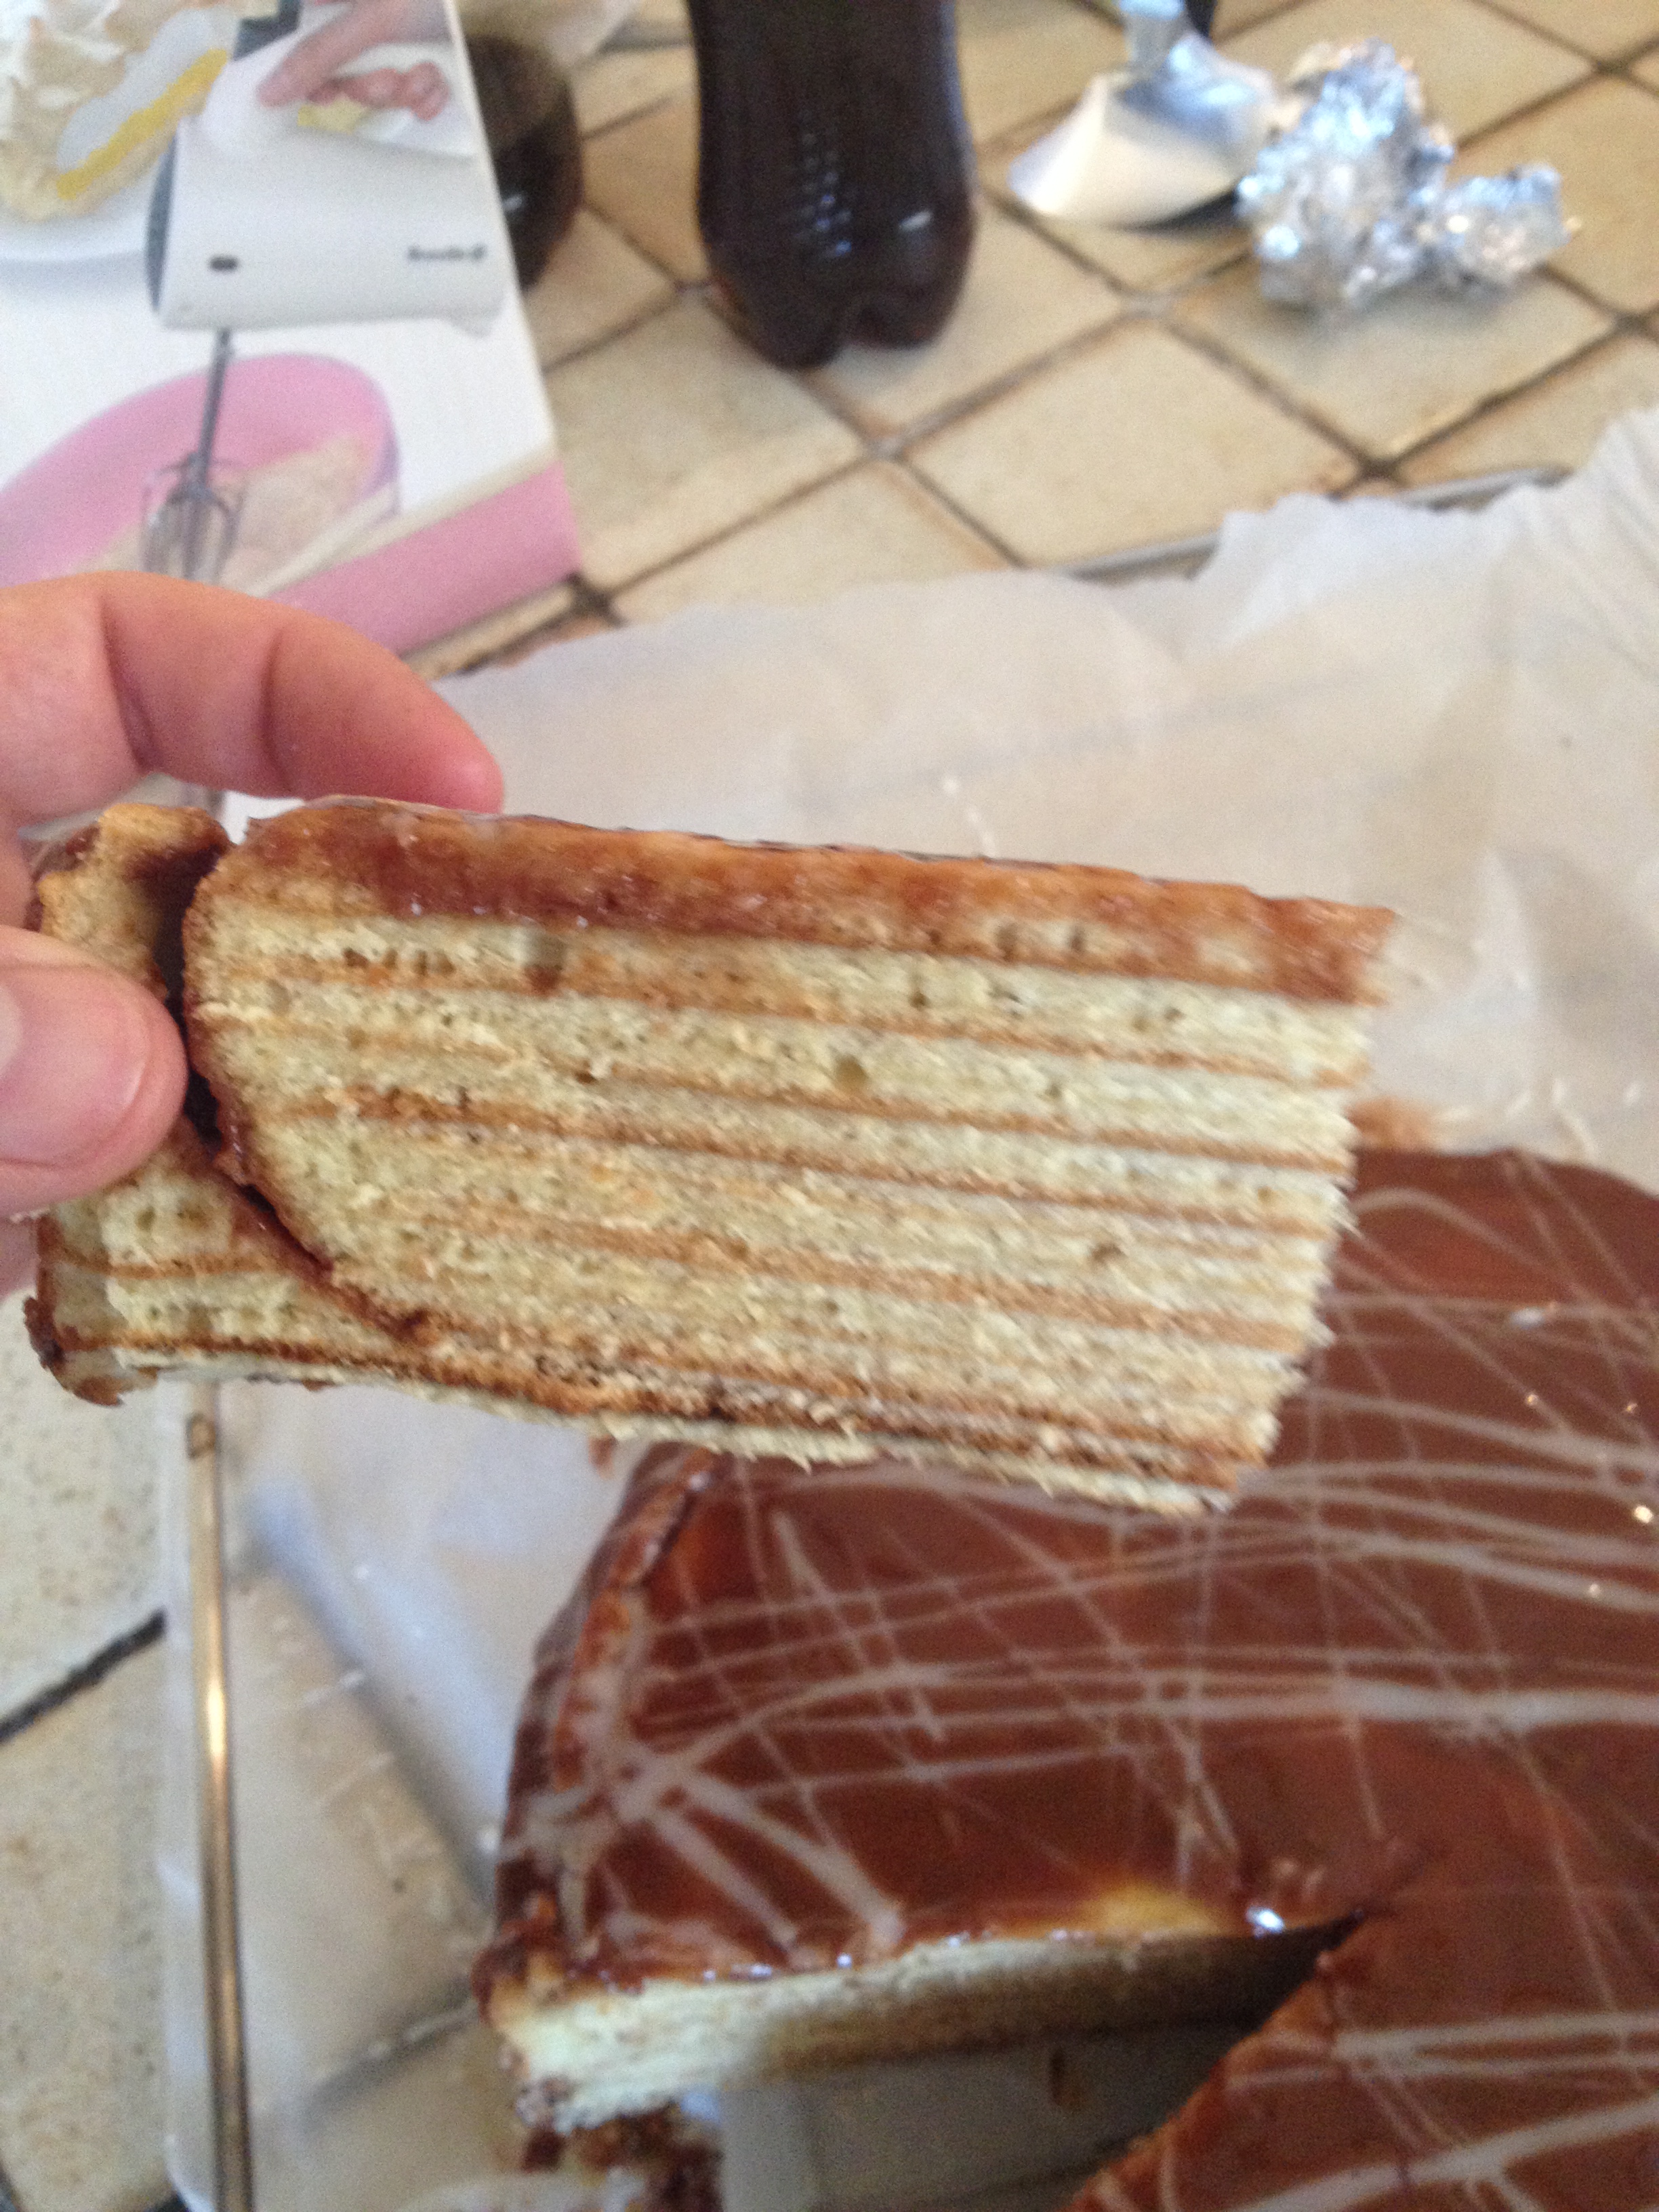 Decent layers - shame about the taste!